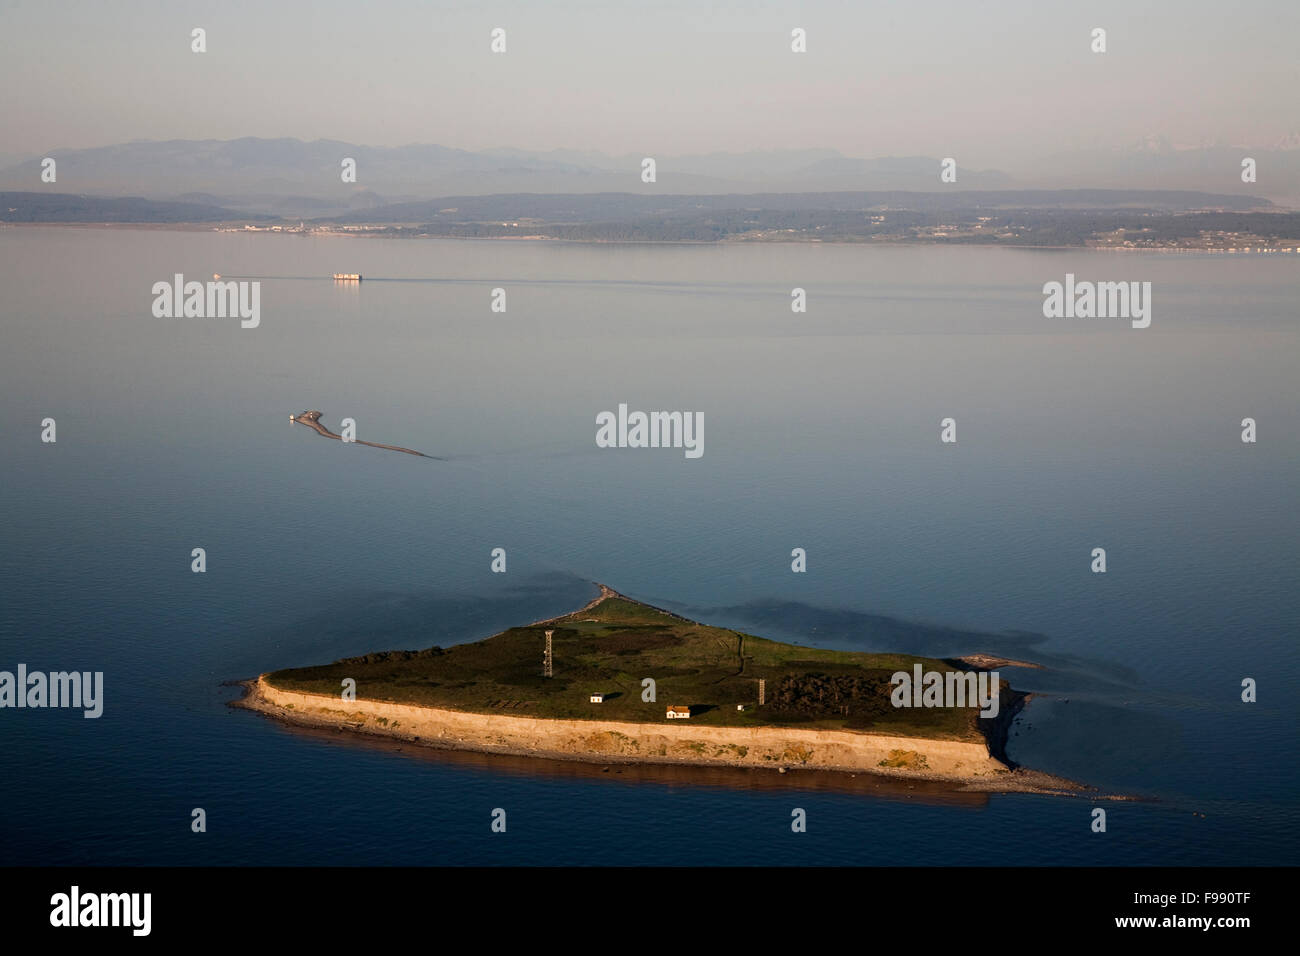 Aerial views of the many islands off the coast of Washington State at dusk. Stock Photo